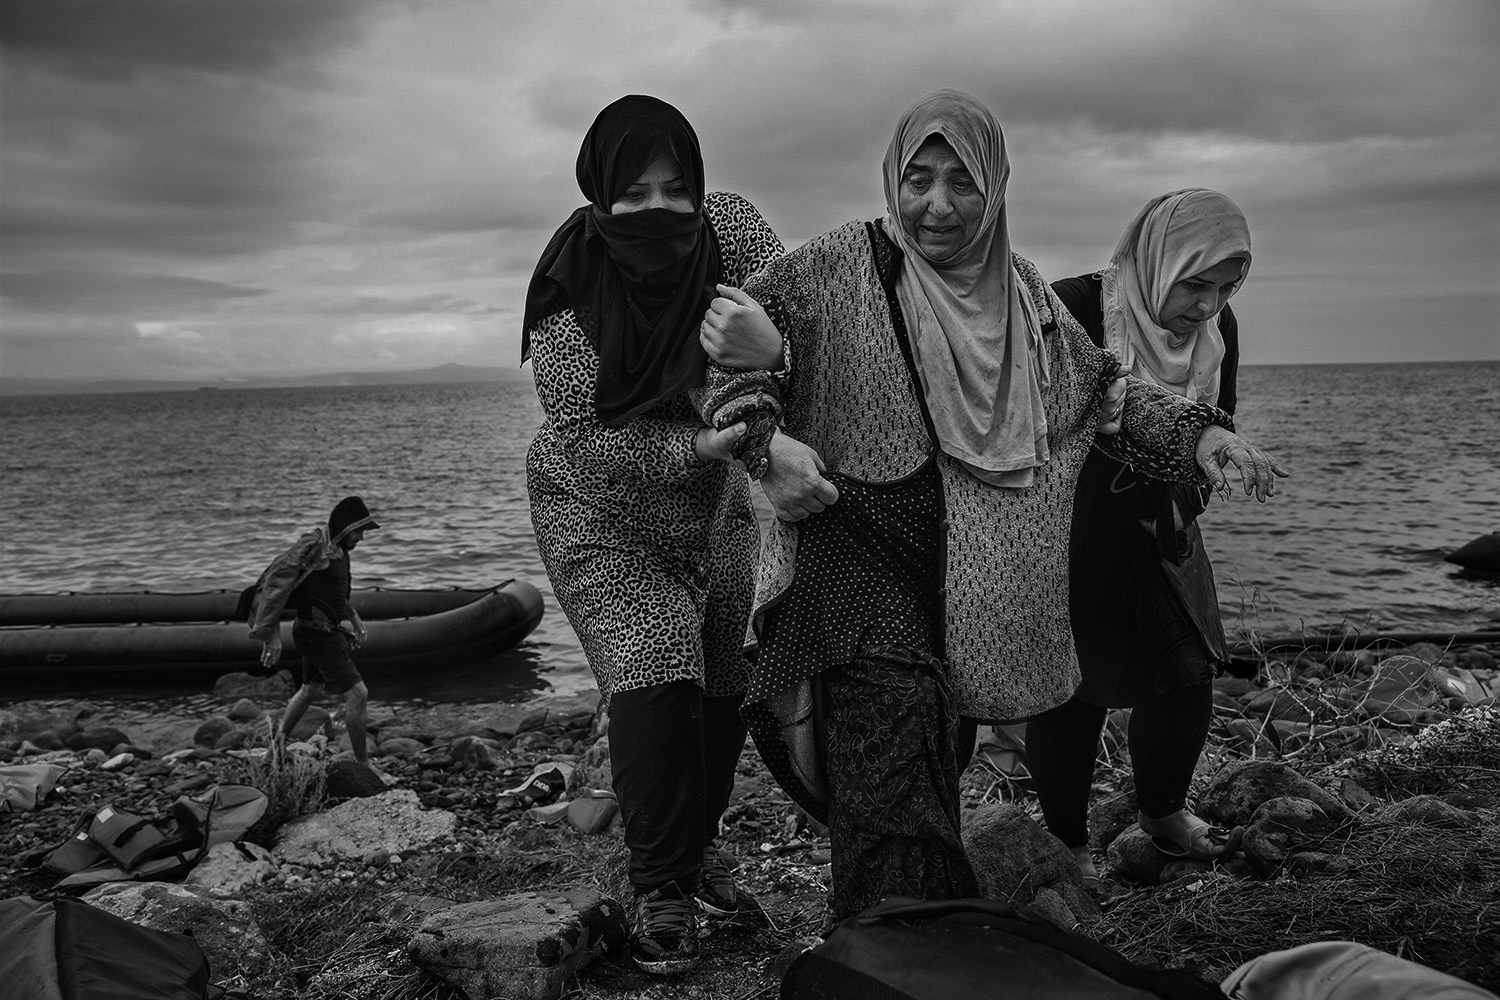 Two women help a third scramble ashore after arriving on the beach in Lesbos, Greece, September 23, 2015. James Nachtwey for TIME